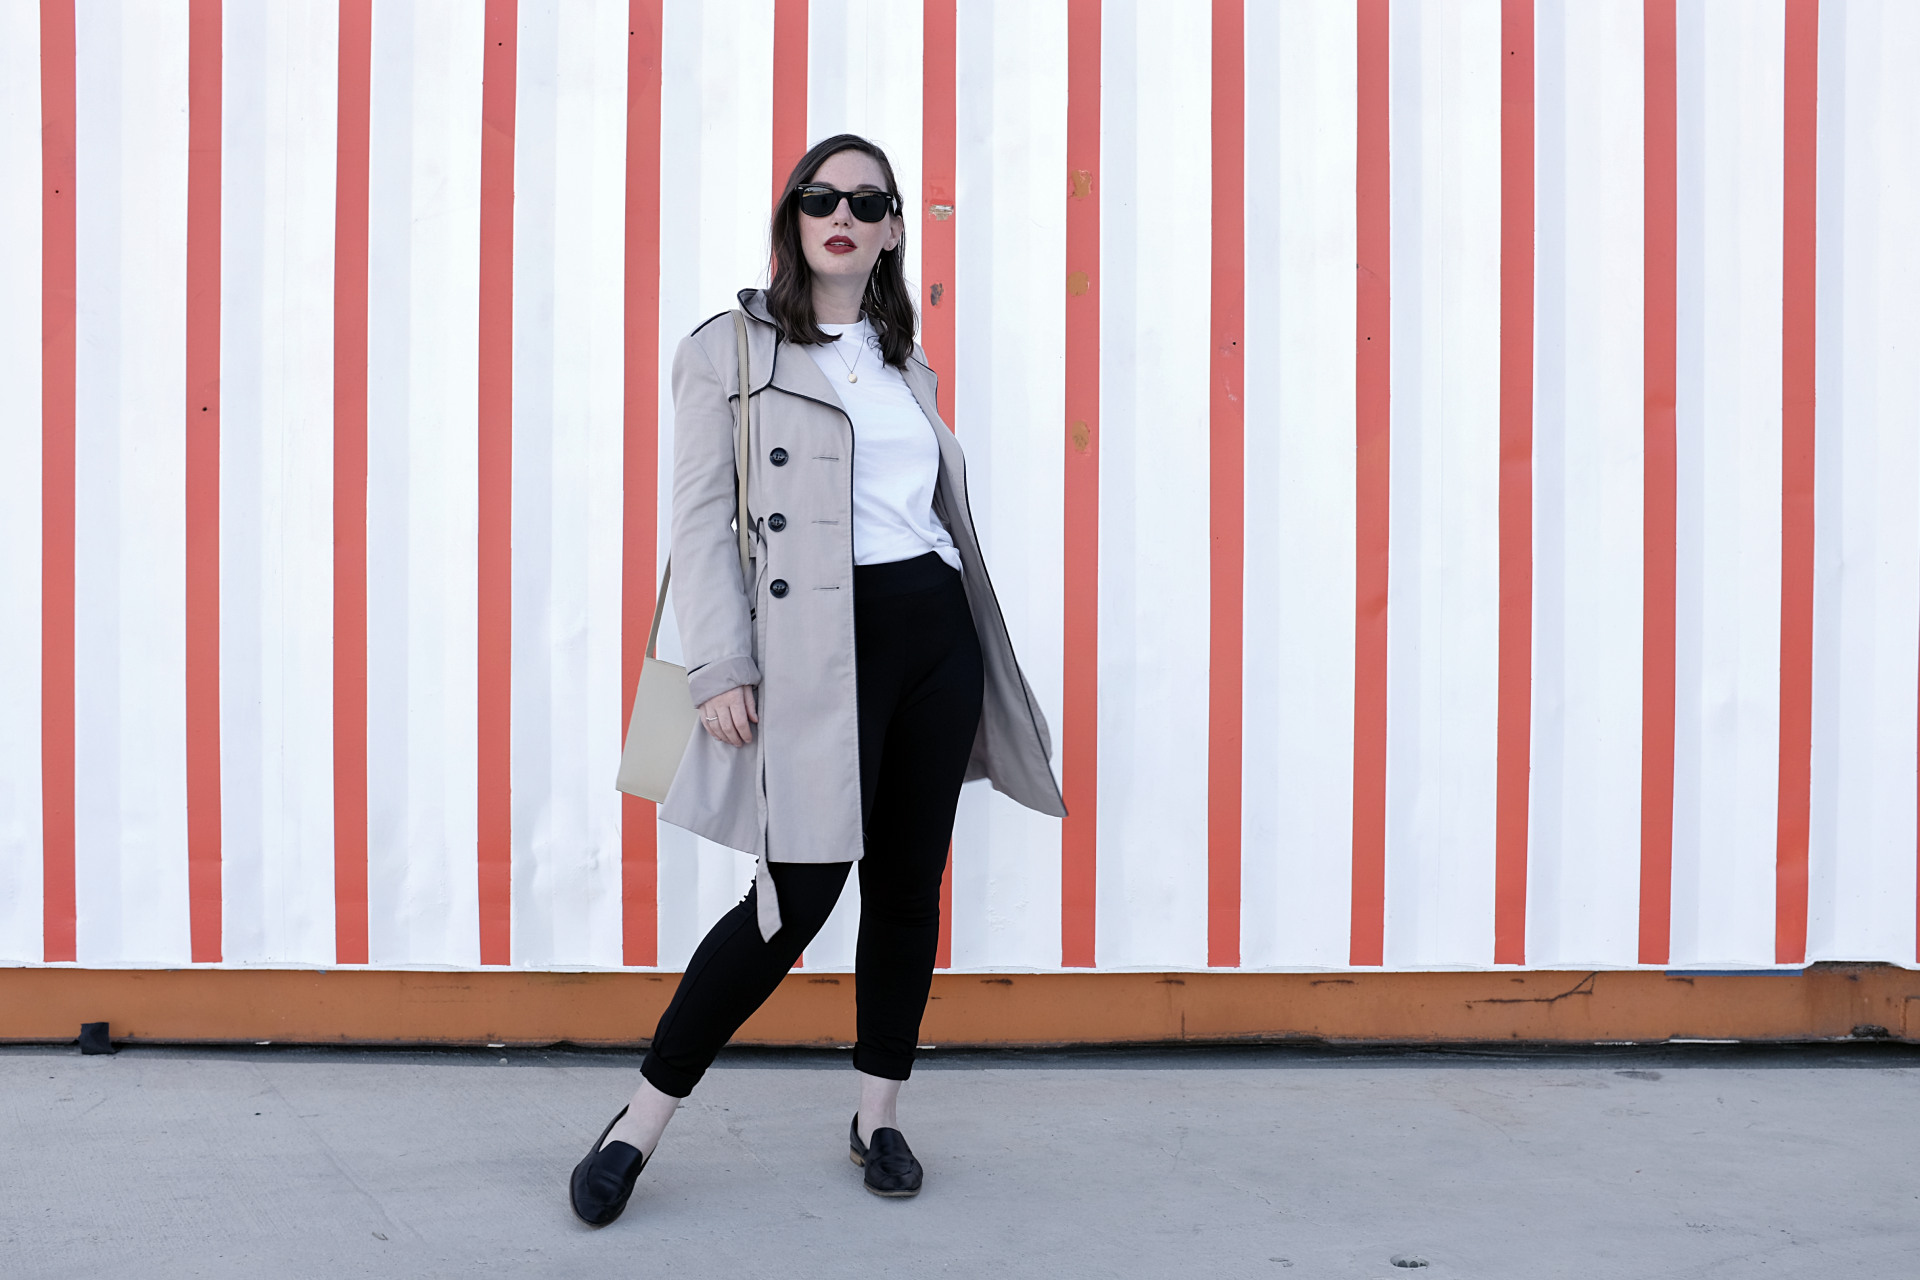 A white woman stands in front of a red and white striped wall. She is wearing a trench, a white tee, black slim pants, and black loafers. Her accessories are minimal jewelry, a crossbody bag, and sunglasses. She is looking at the camera.